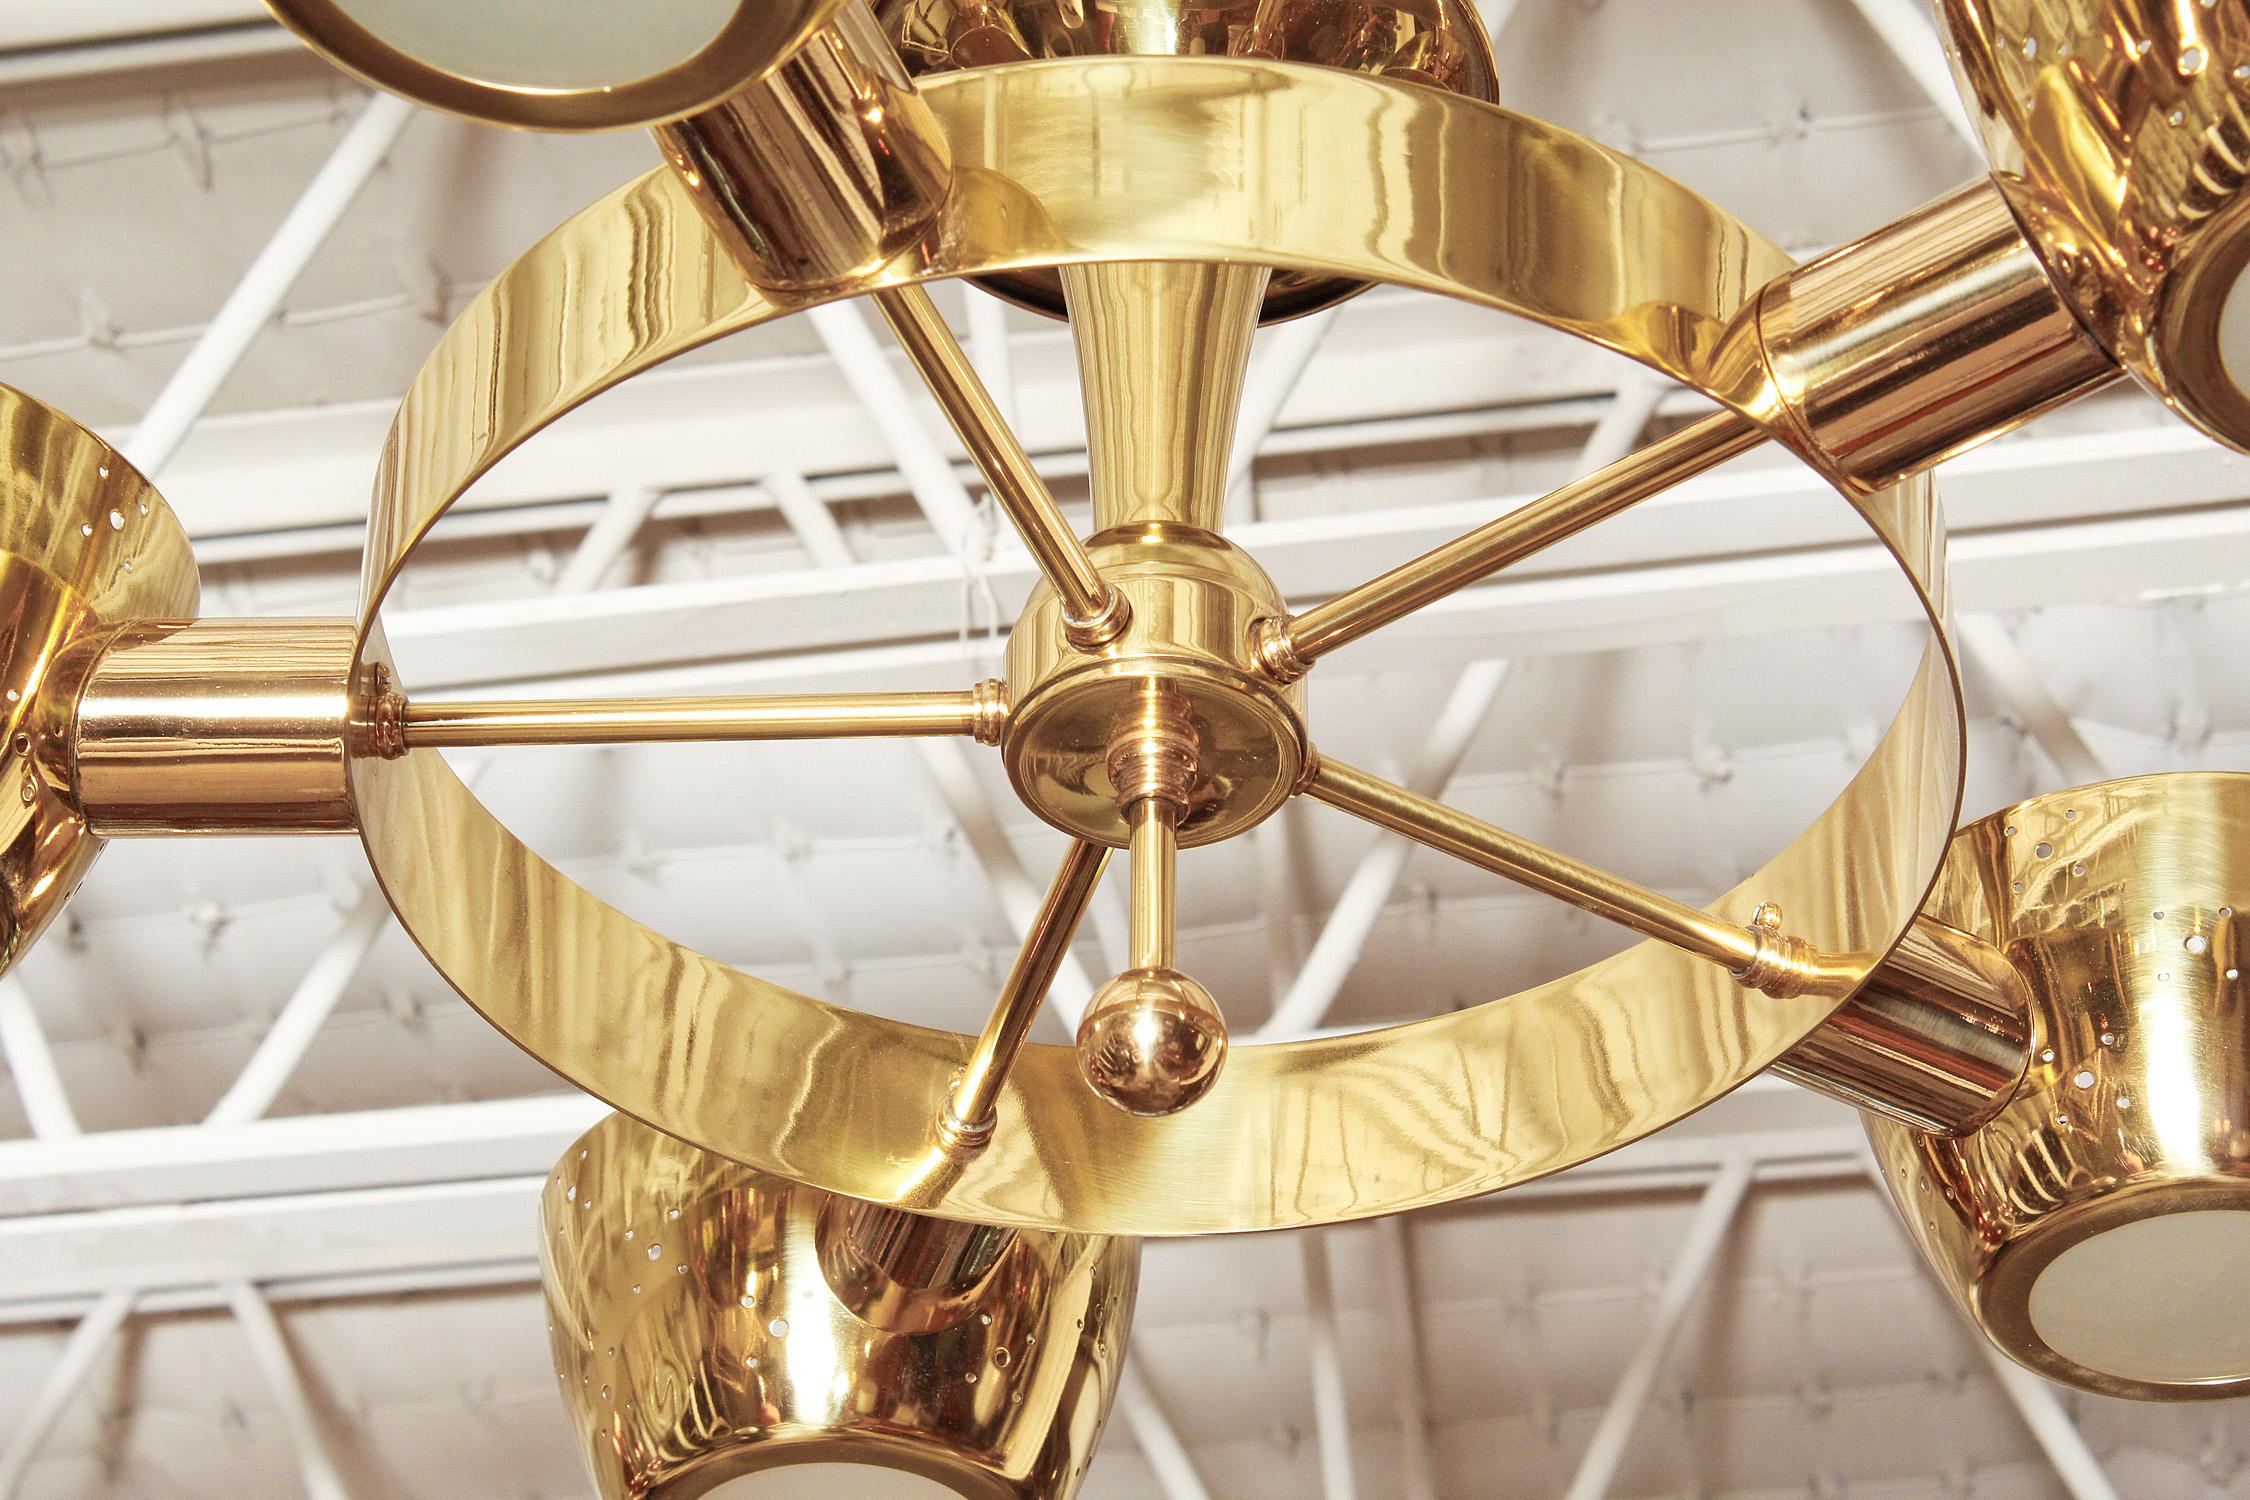 American Midcentury Polished Brass Chandelier by Lightolier